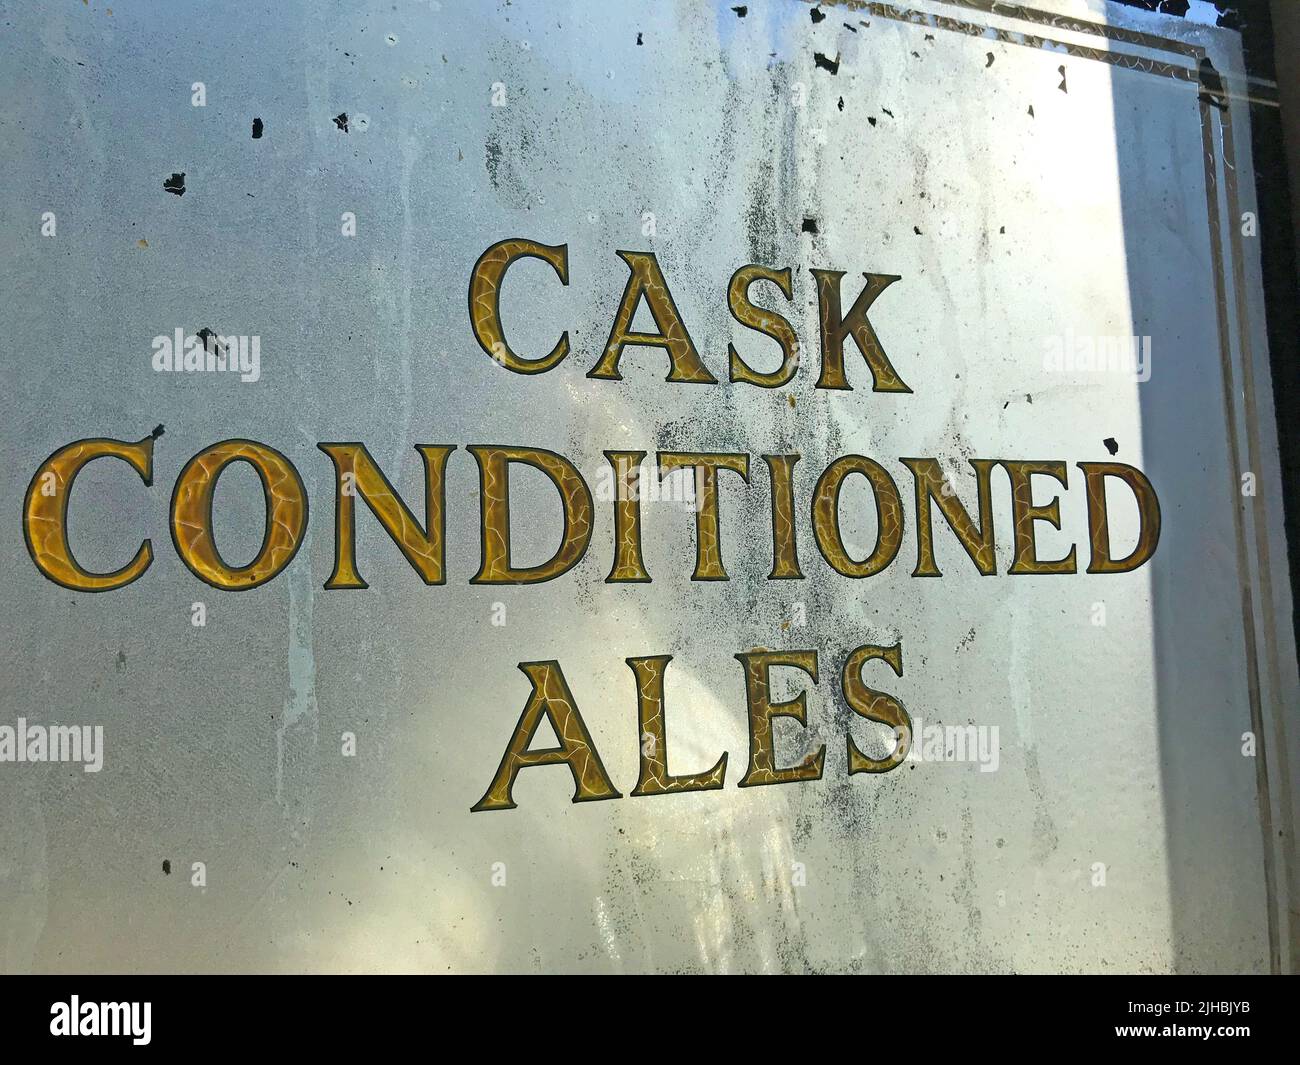 Cask Conditioned Ales sign, at The Kings Arms pub,25 Roupell St, London,England,UK, SE1 8TB Stock Photo